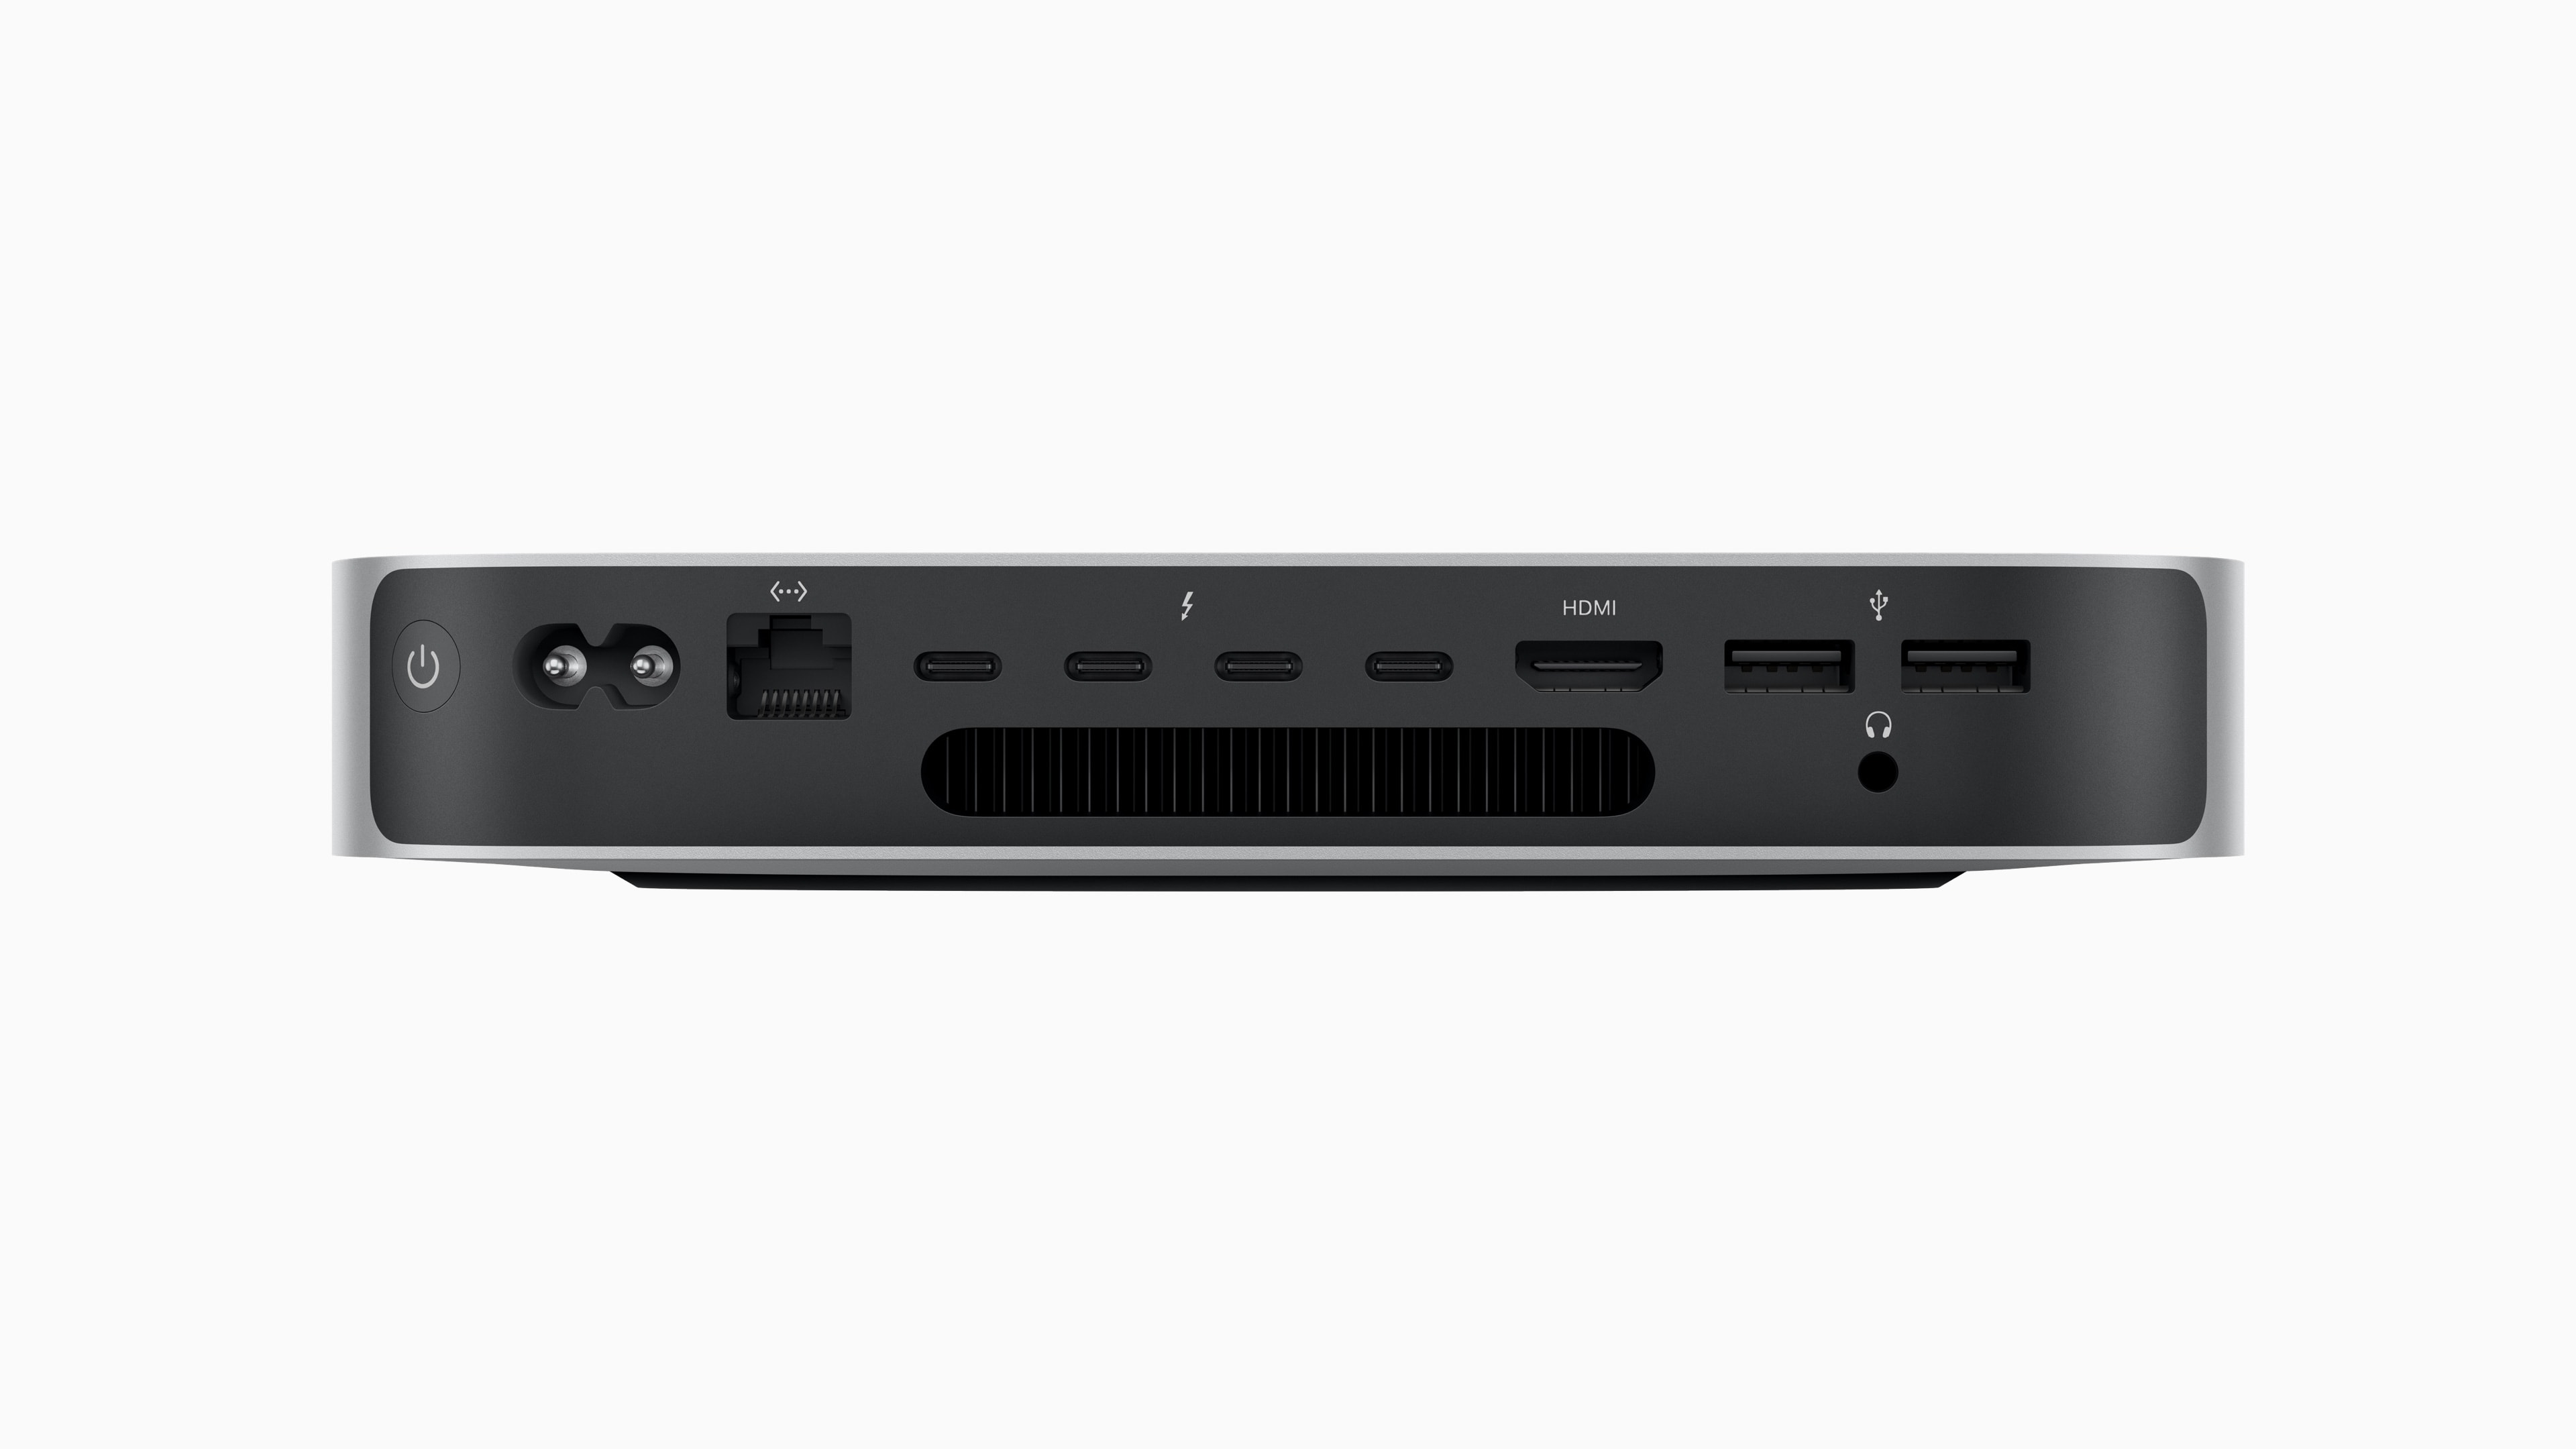 The rear of the Mac mini with M2 Pro